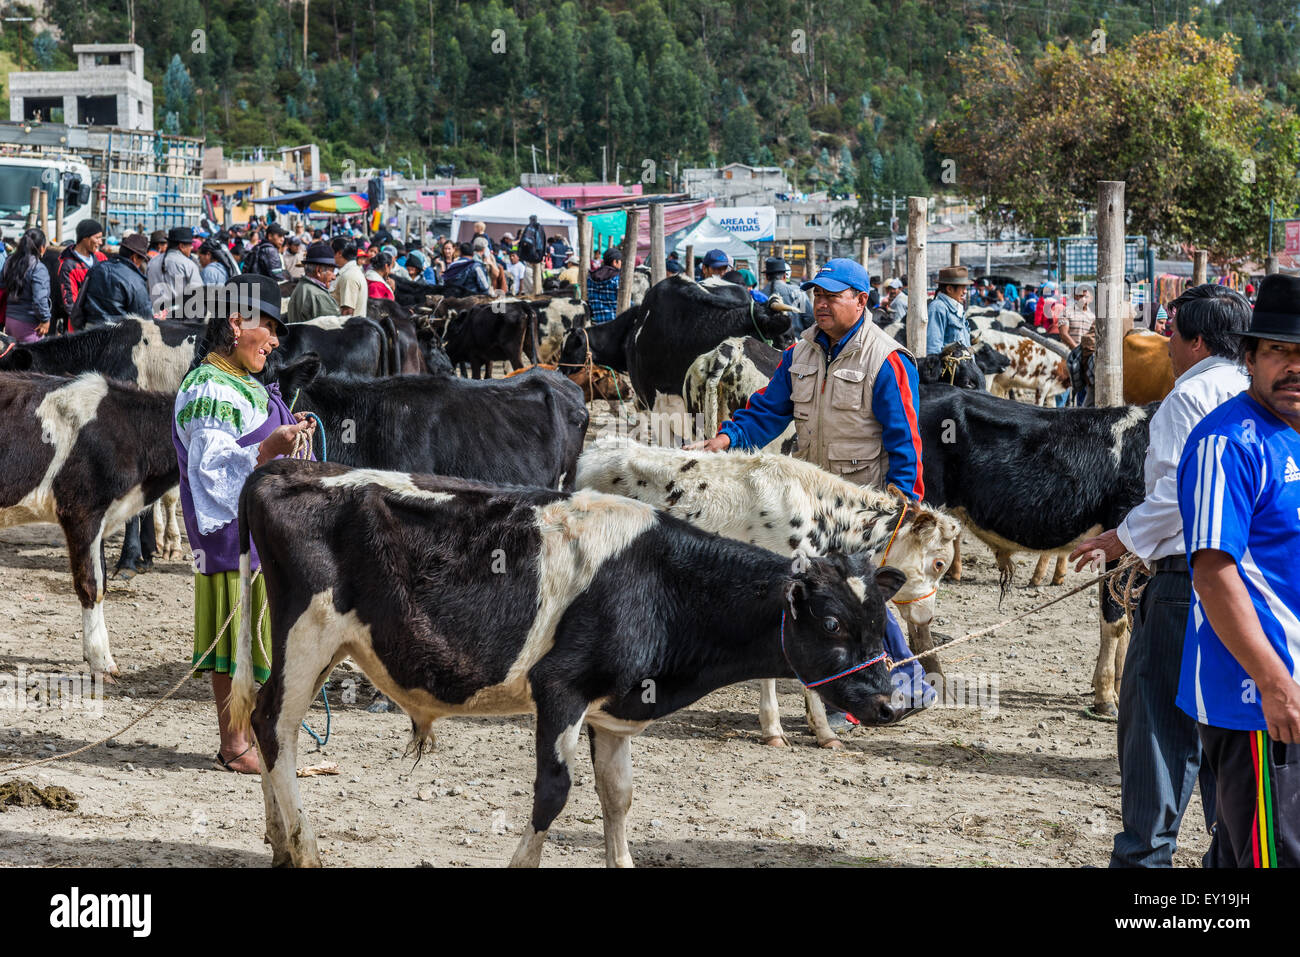 Cows and other animals are bought and sold at livestock market. Otavalo, Ecuador. Stock Photo